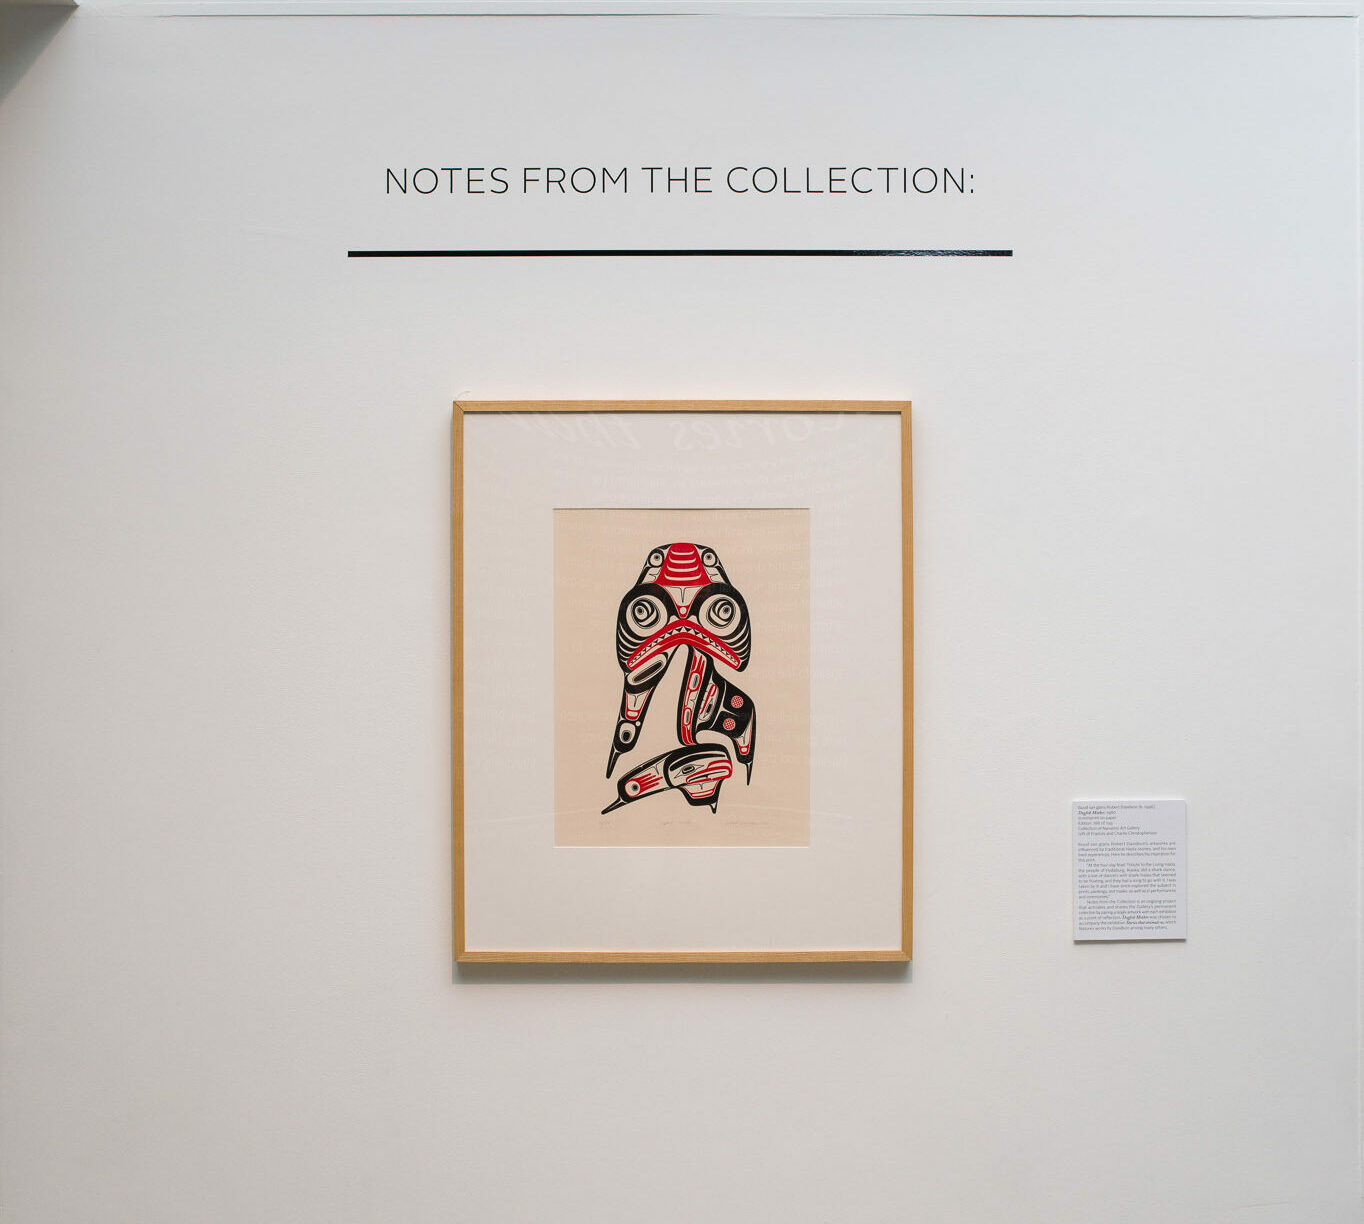 Haida print of a dogfish in red and black artwork displayed in a gallery with an informational plaque to the right.